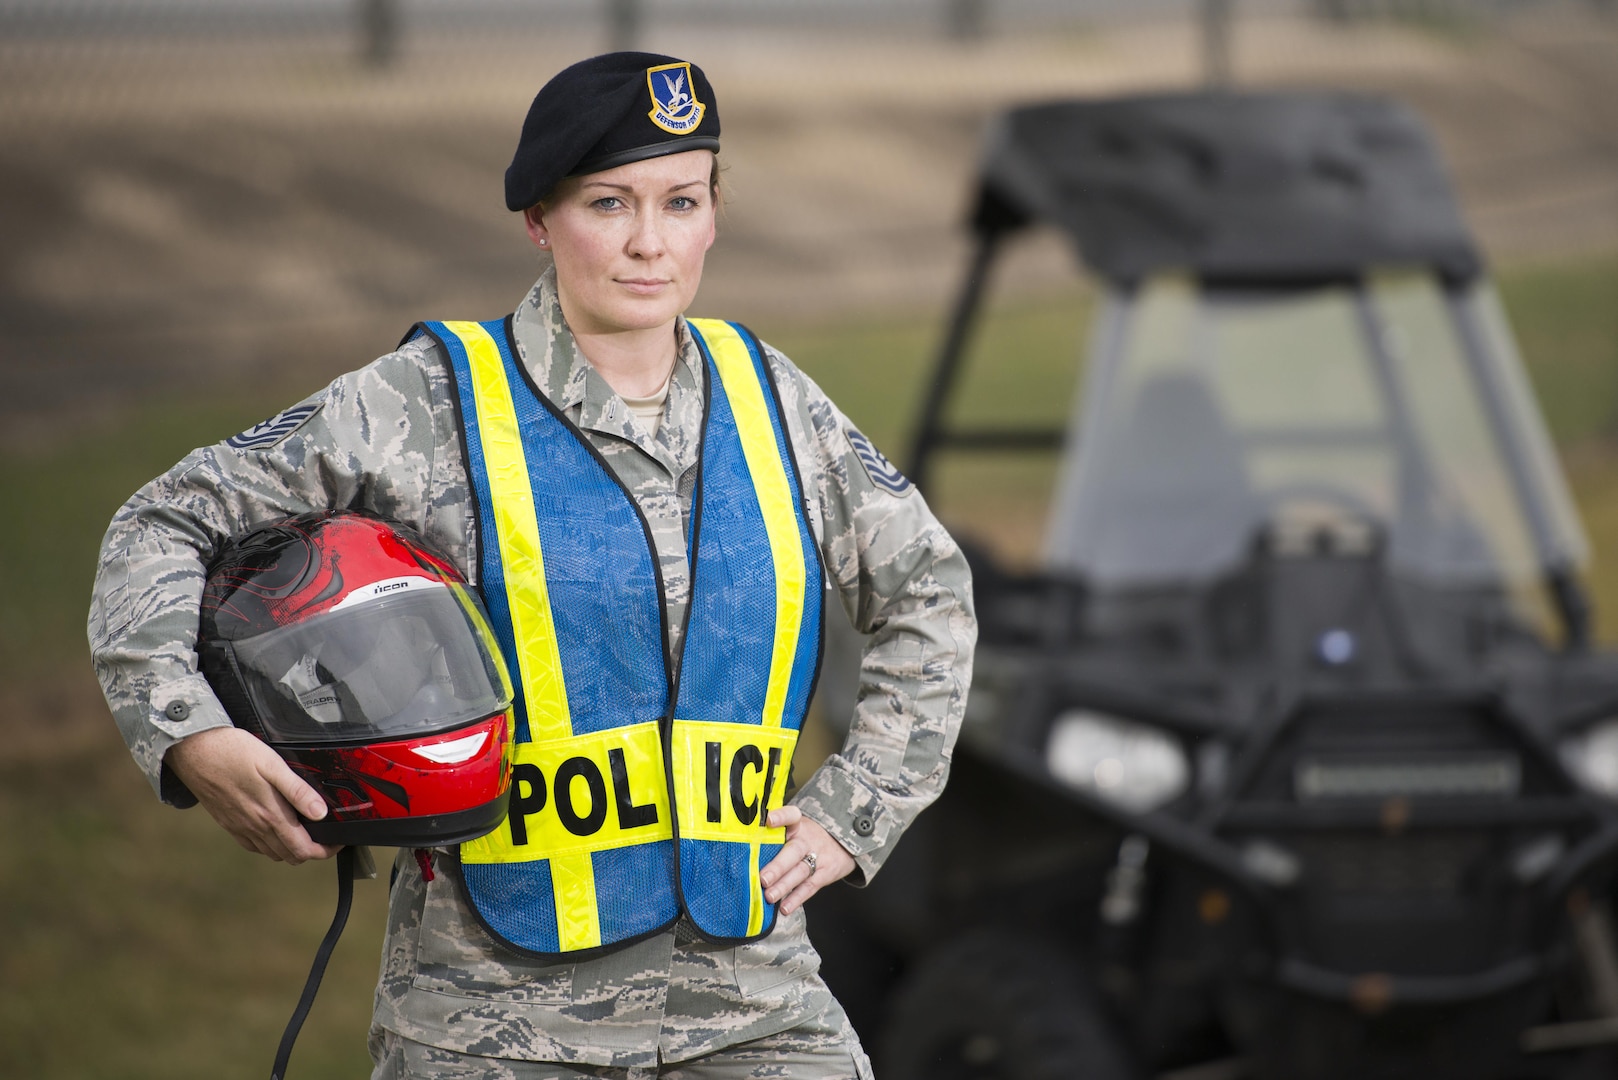 Technical Sgt. Michelle Aberle, 802nd Security Forces Squadron installation security, poses for a photo prior to conducting a security check May 9, 2017, at Joint Base San Antonio-Lackland, Texas.  Aberle and Turner provide force protection for base personnel, equipment and facilities from threats to include intrusion by unauthorized people. (Photo by Sean Worrell)